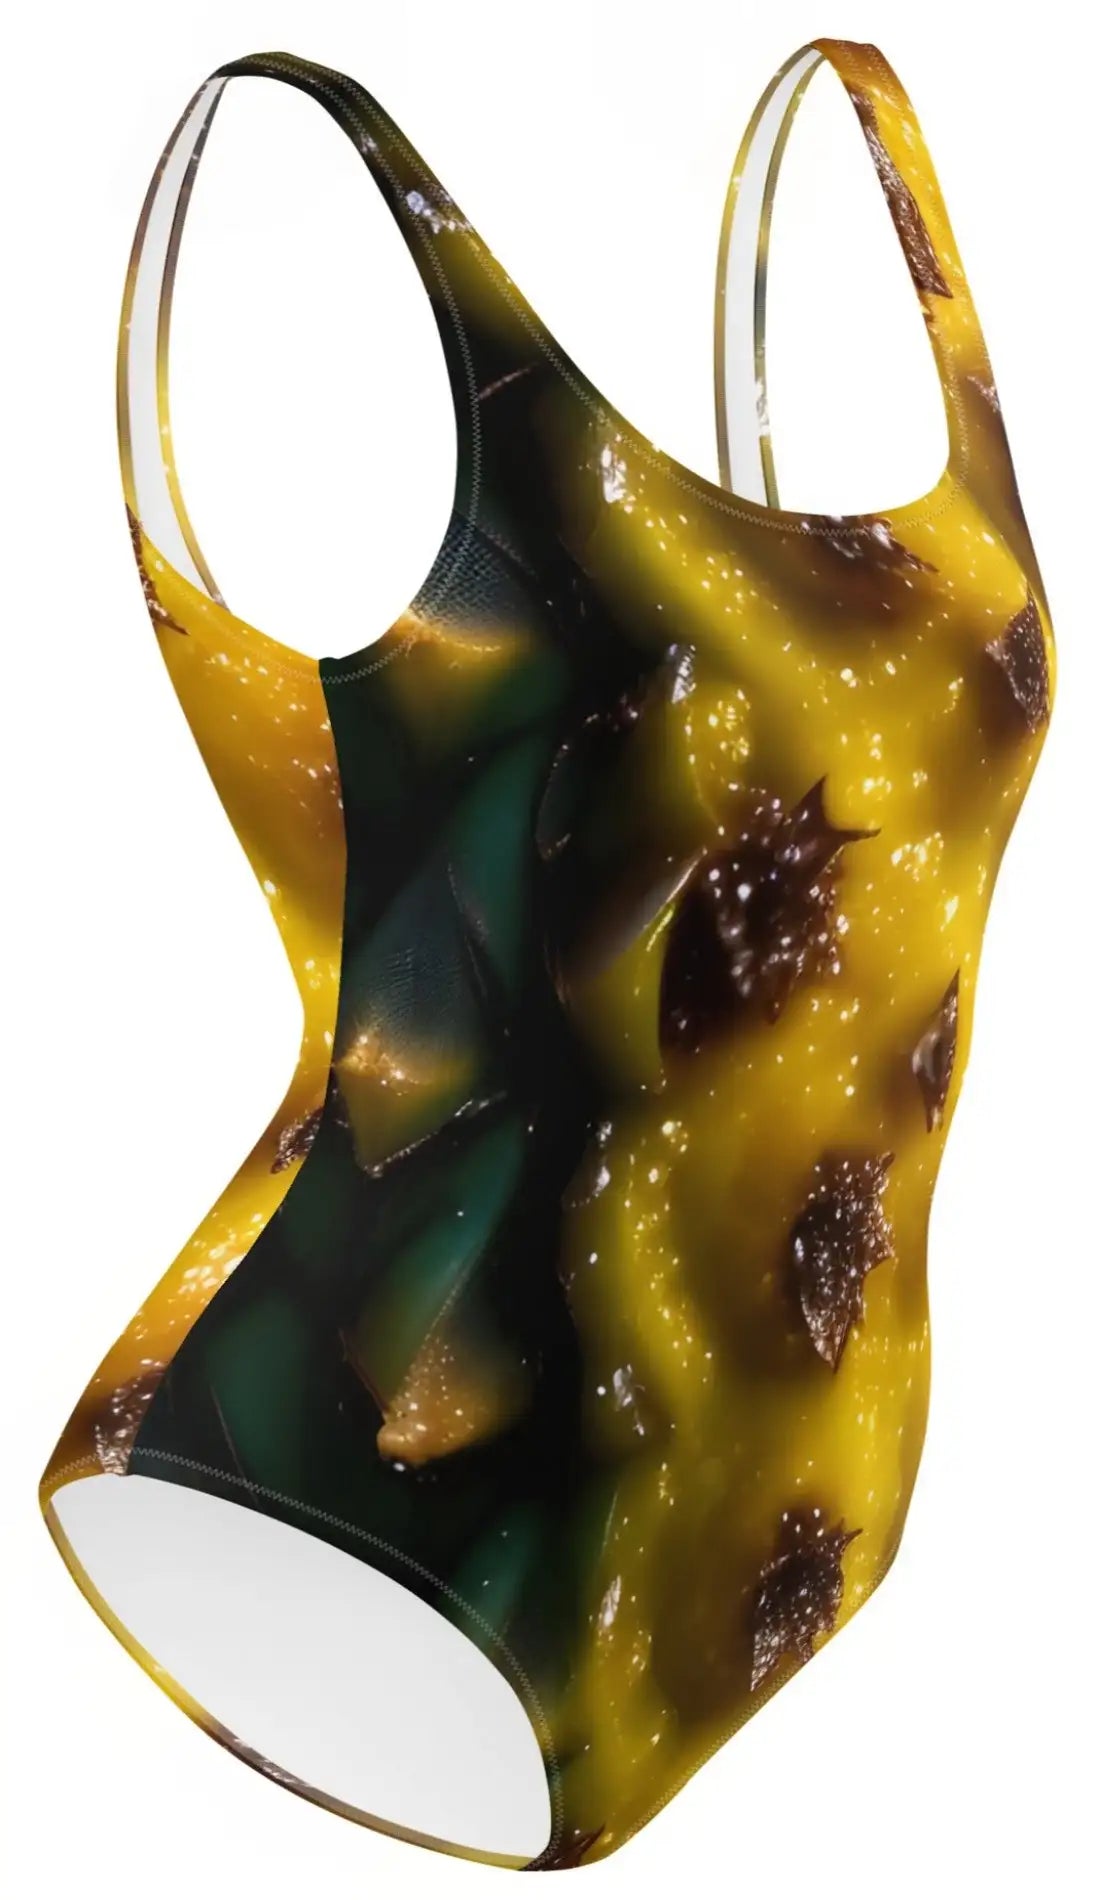 Spike & Shine: Textured Pineapple One-Piece Swimsuit